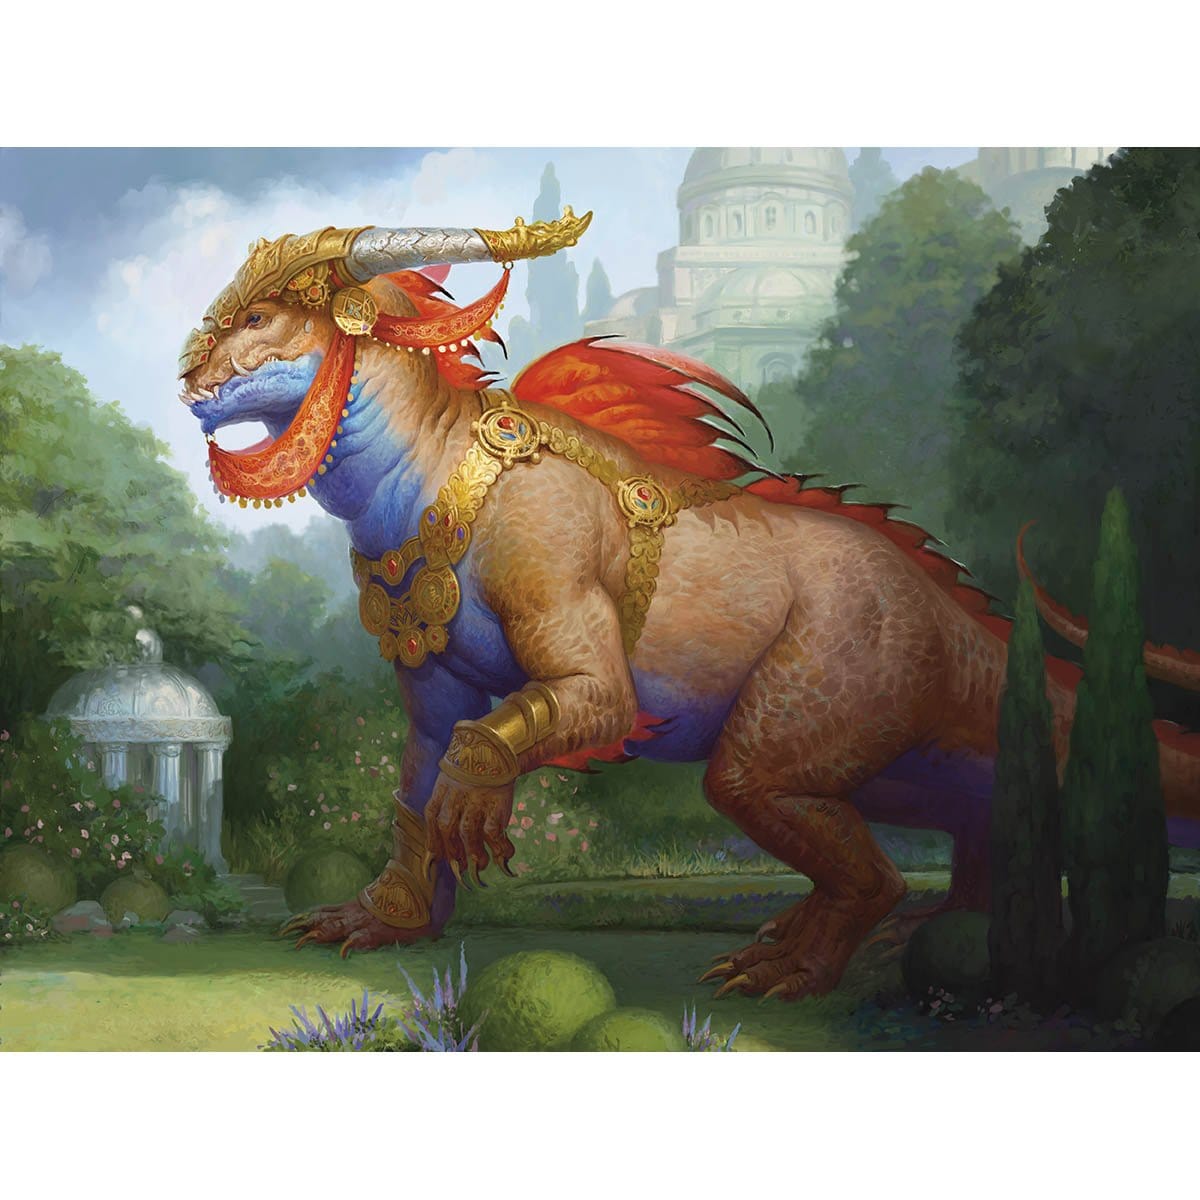 Regal Behemoth Print - Print - Original Magic Art - Accessories for Magic the Gathering and other card games